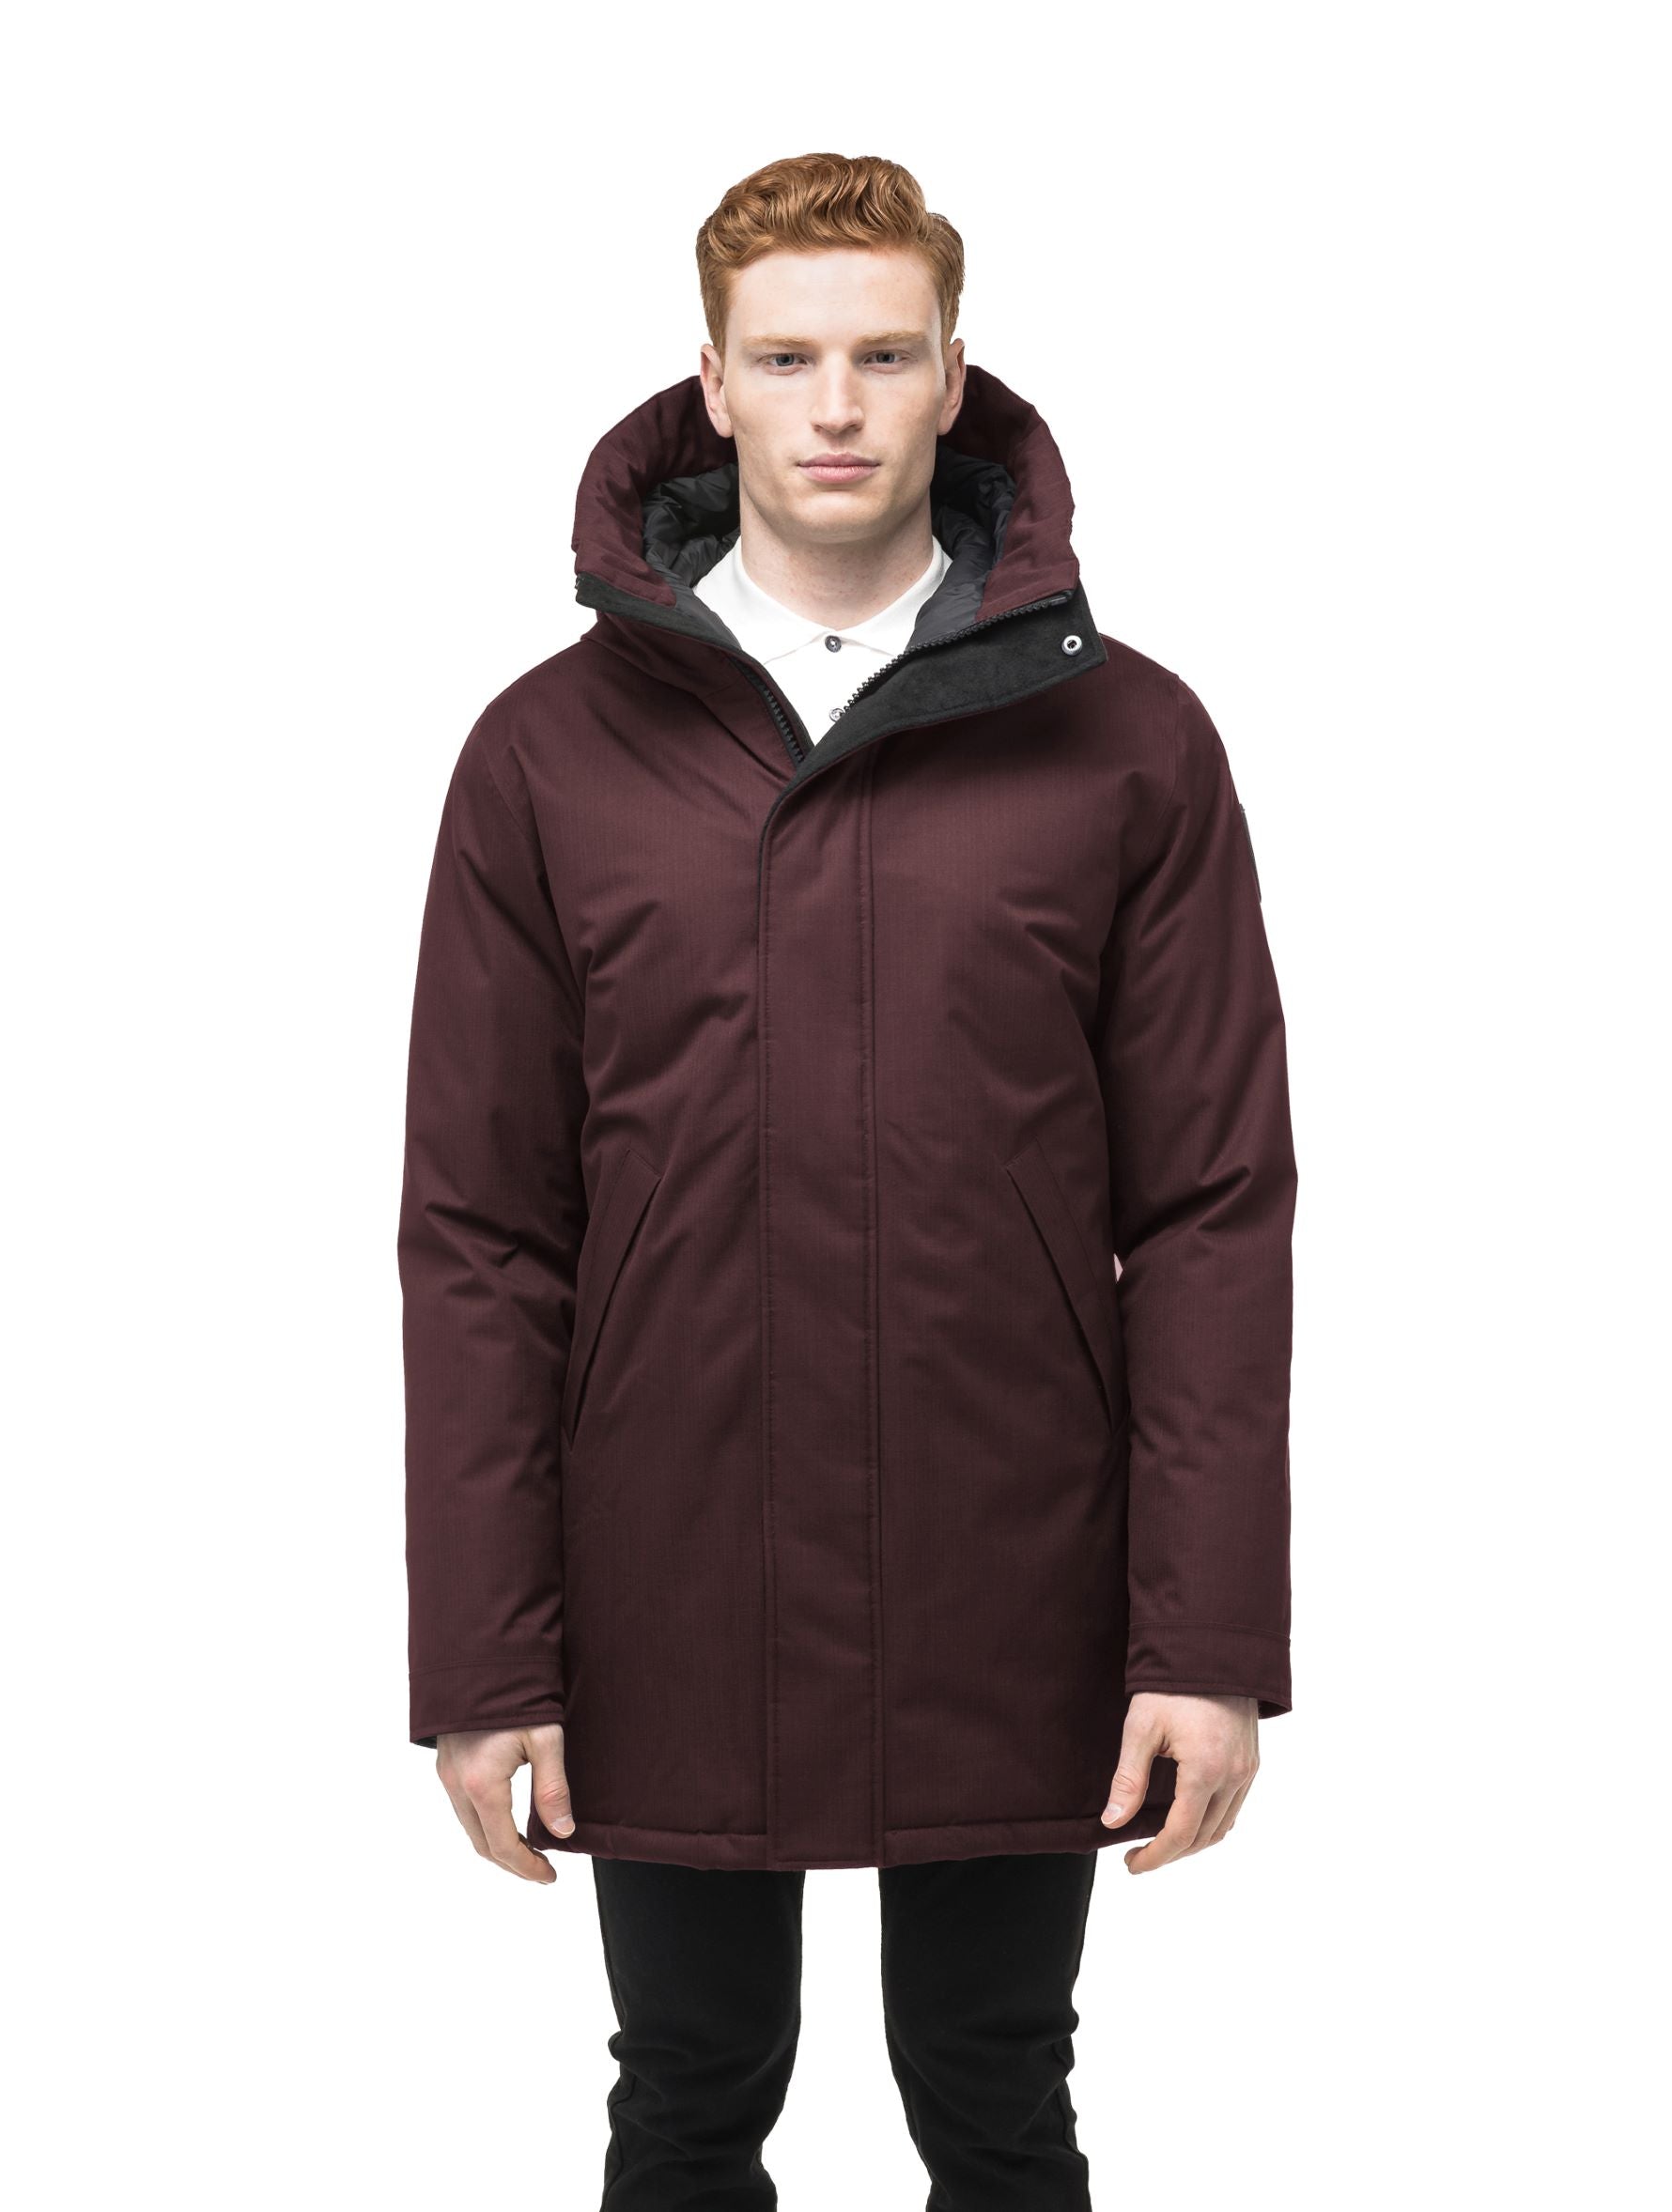 Pierre Men's Jacket in thigh length, Canadian white duck down insulation, non-removable down-filled hood, angled waist pockets, centre-front zipper with wind flap, and elastic ribbed cuffs, in CH Merlot